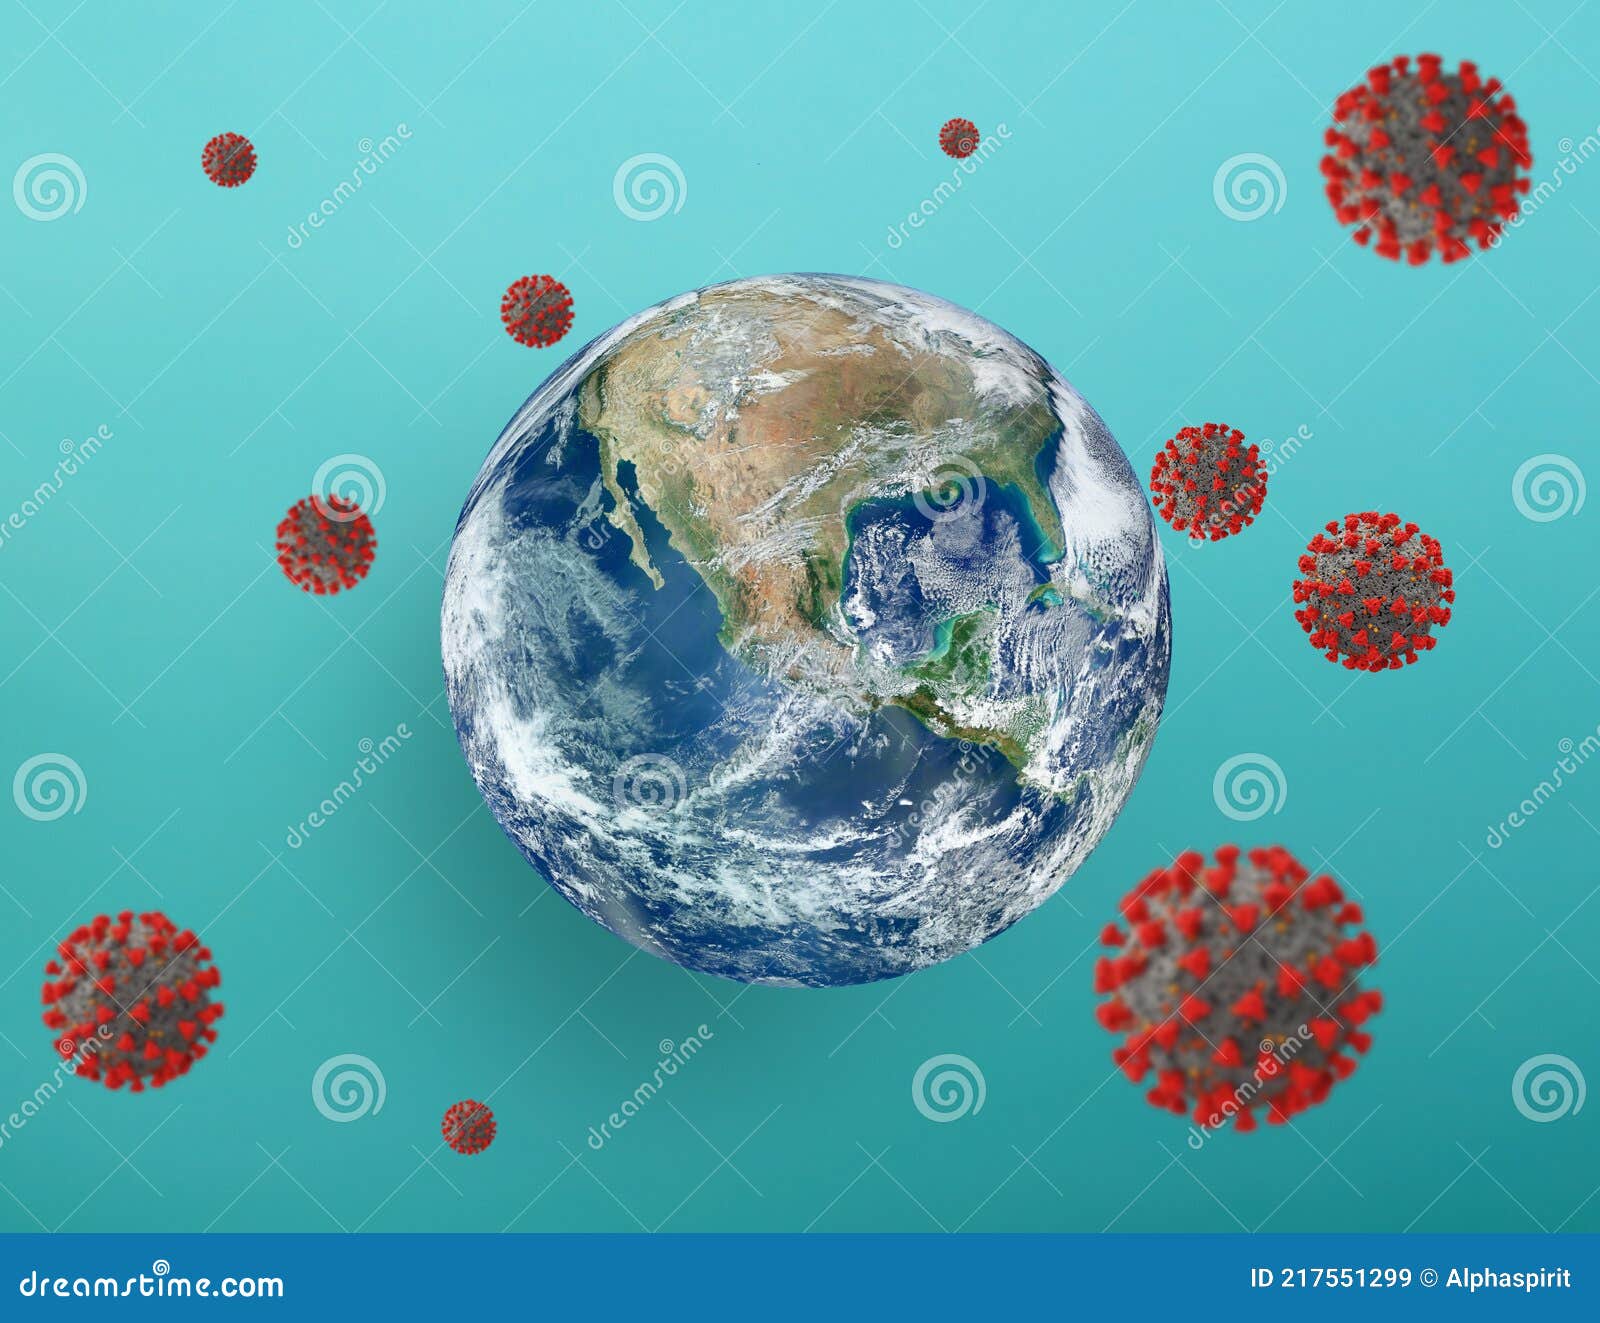 world with the  of covid-19 coronavirus. concept of pandemic and contagion.